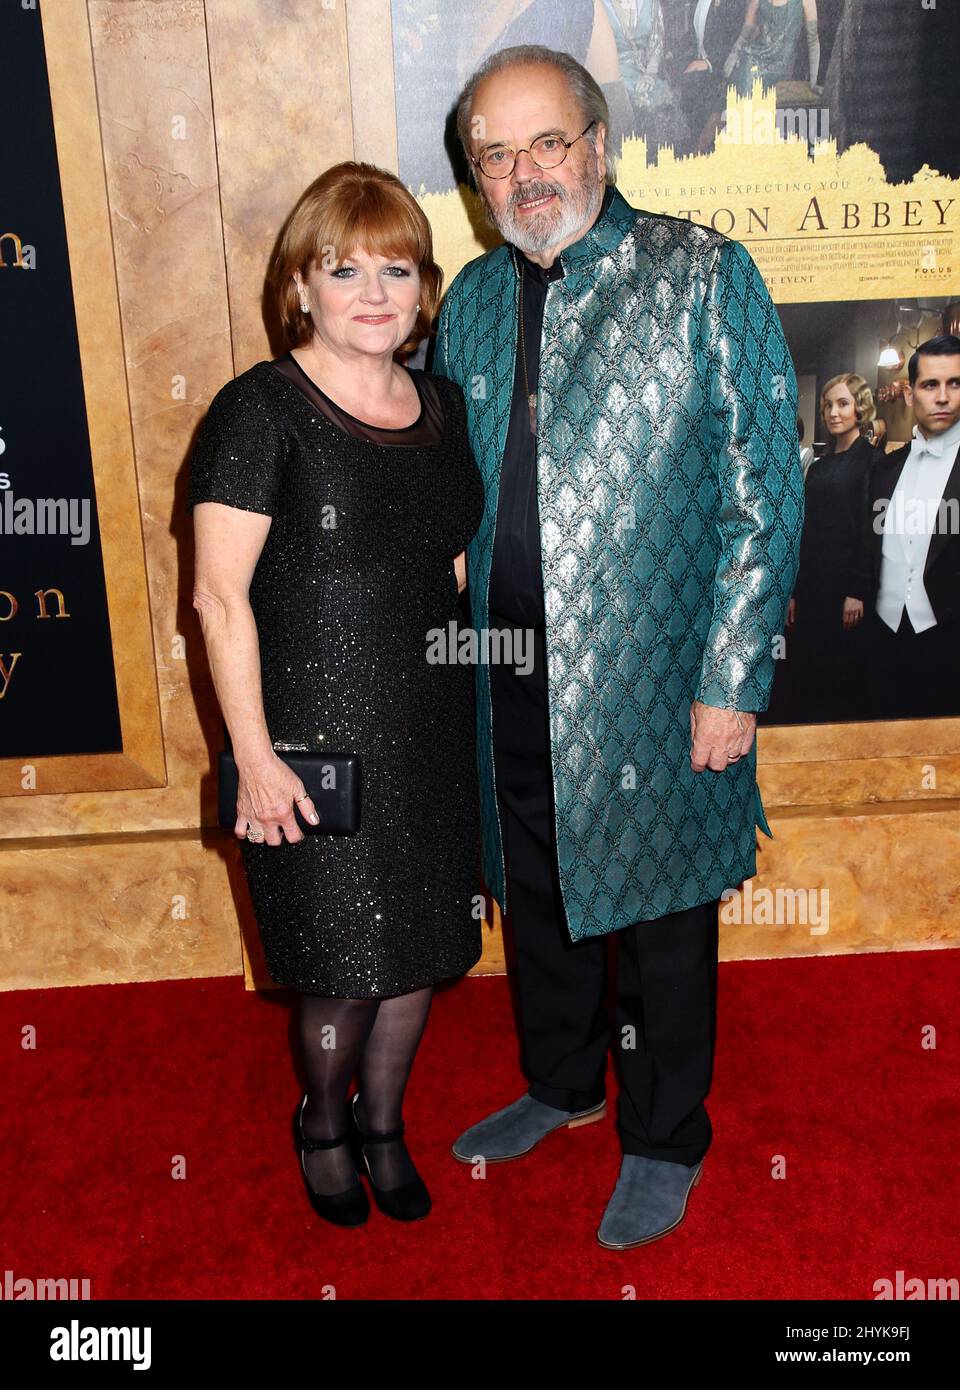 Lesley Nicol & husband David Keith Heald attending the Downton Abbey Premiere held at Alice Tully Hall in New York Stock Photo